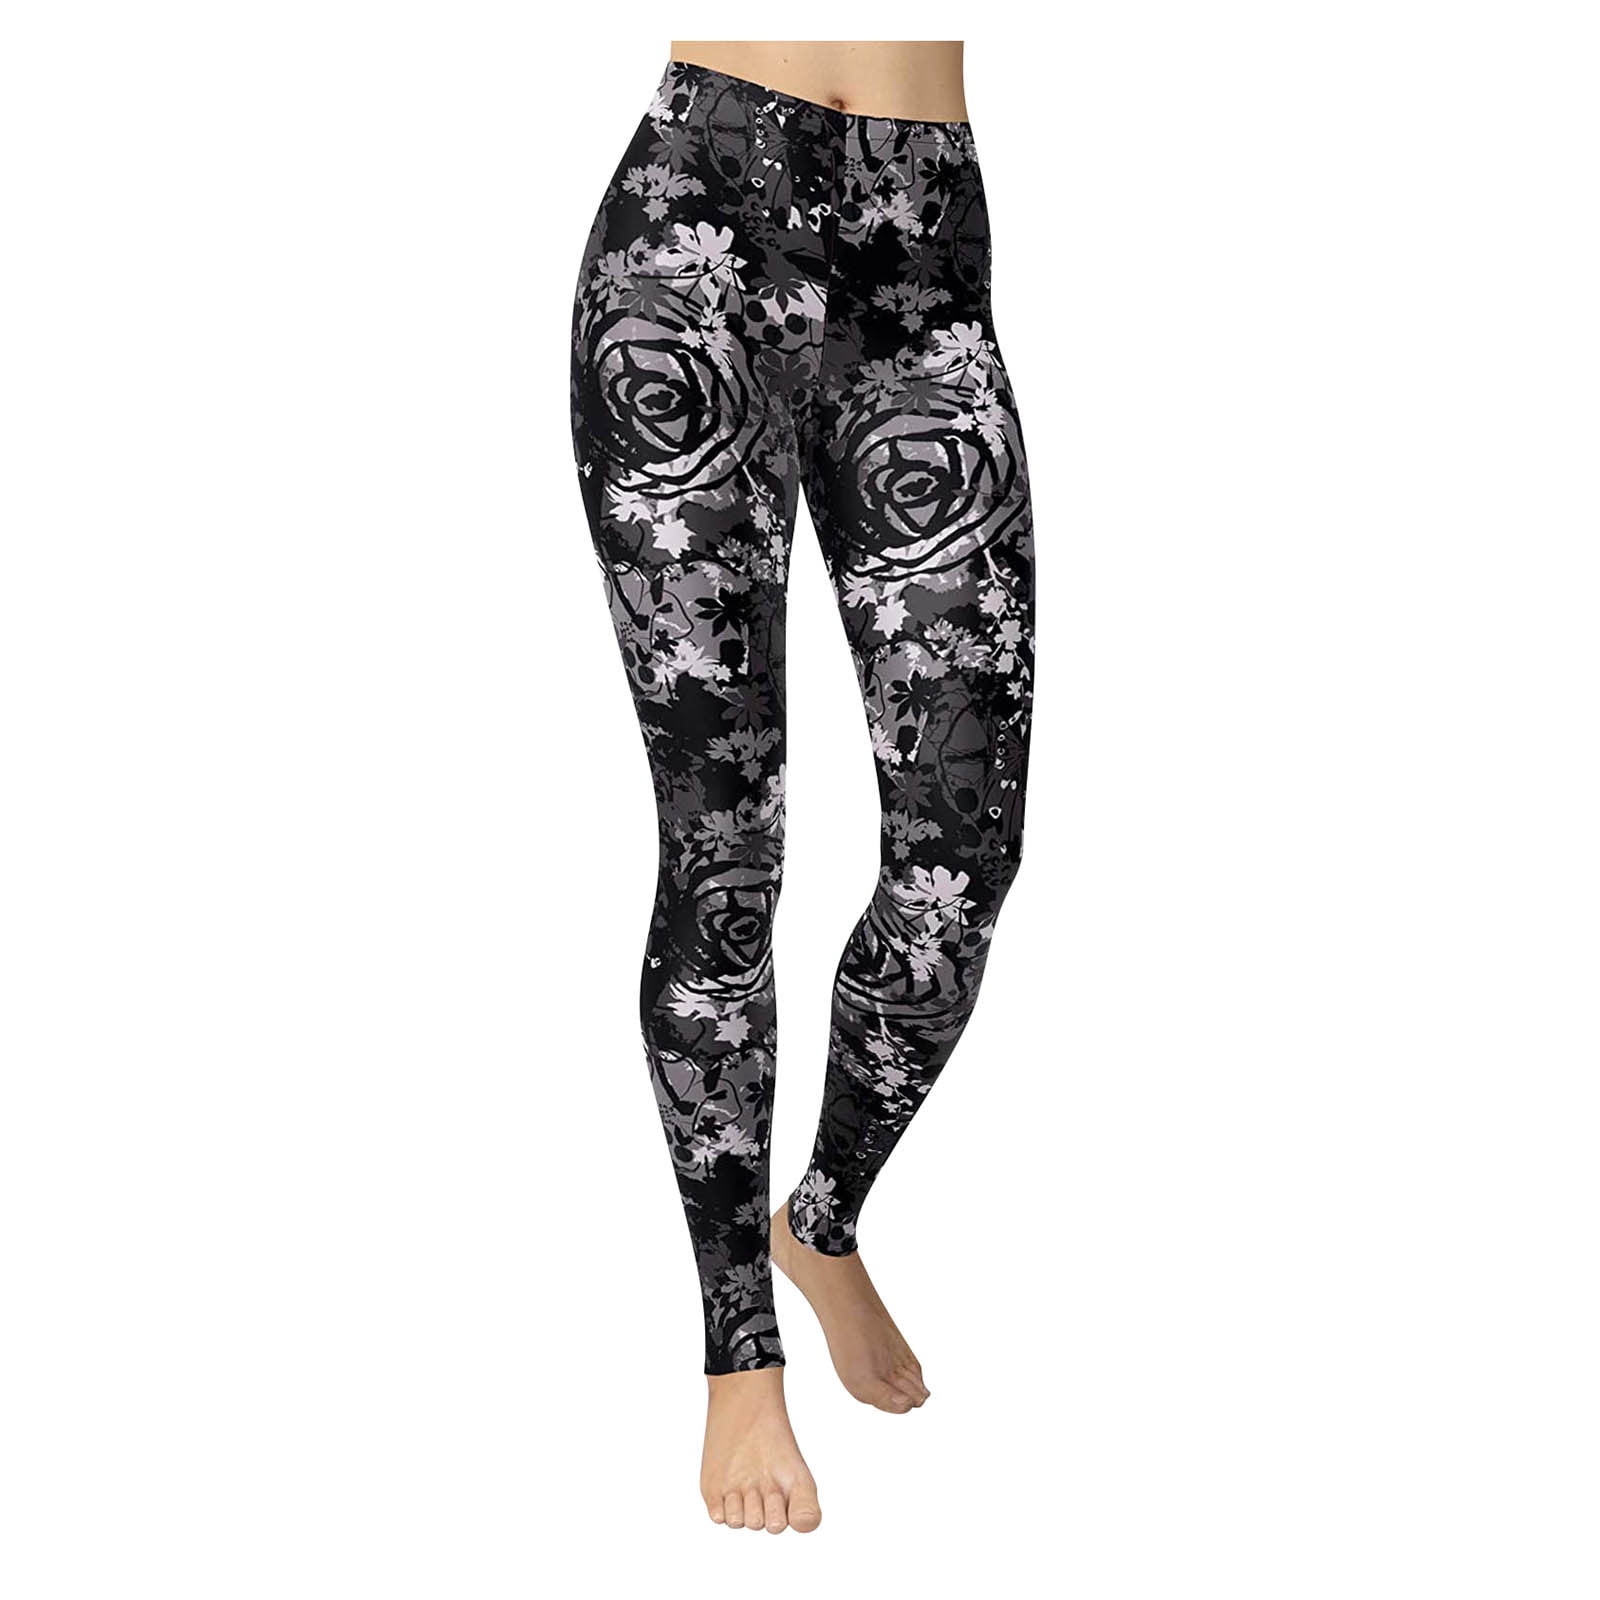 Womens Printed Yoga Leggings Sports Fitness Gym Active High Waist Stretch Pants 